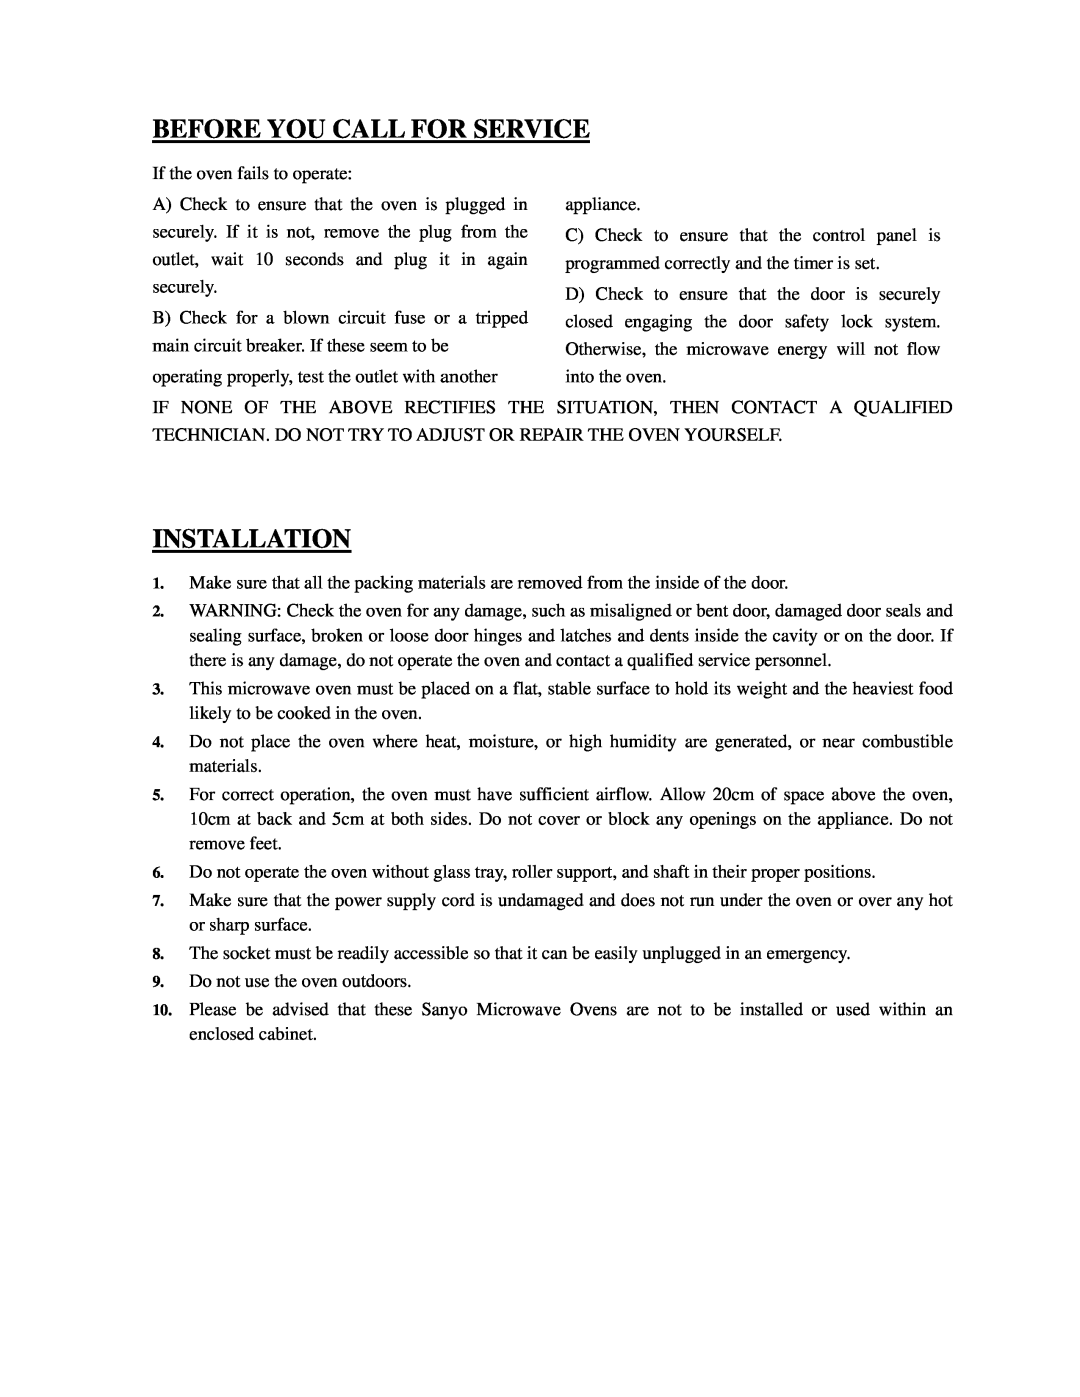 Sanyo EM-S3579V instruction manual Before You Call For Service, Installation 